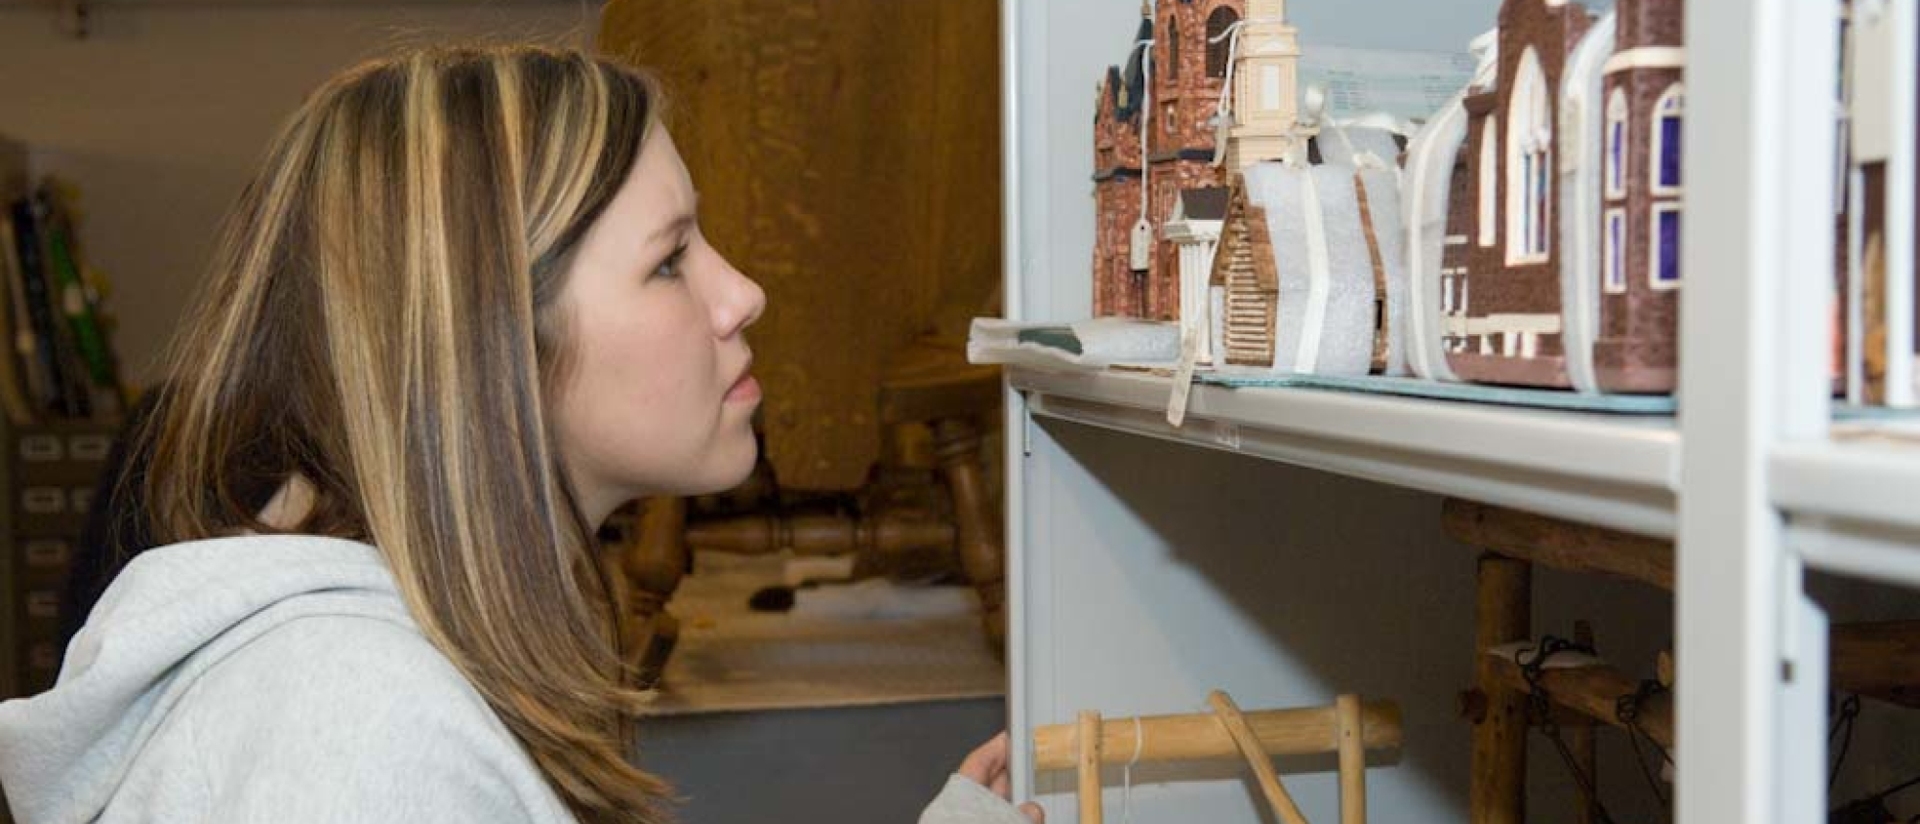 Student studies artifacts at a museum